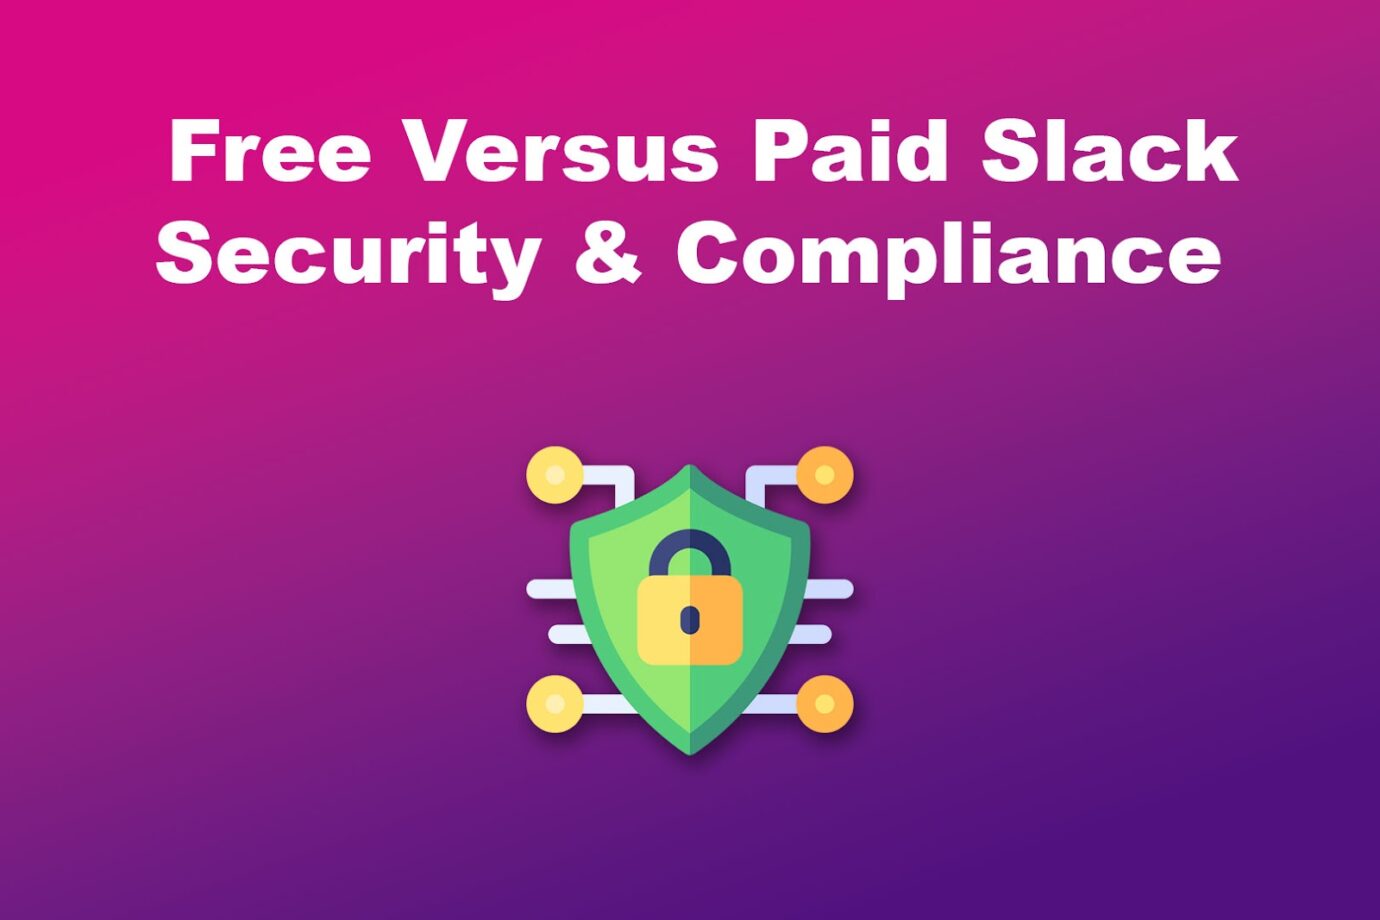 Free Versus Paid Slack Security and Compliance Features